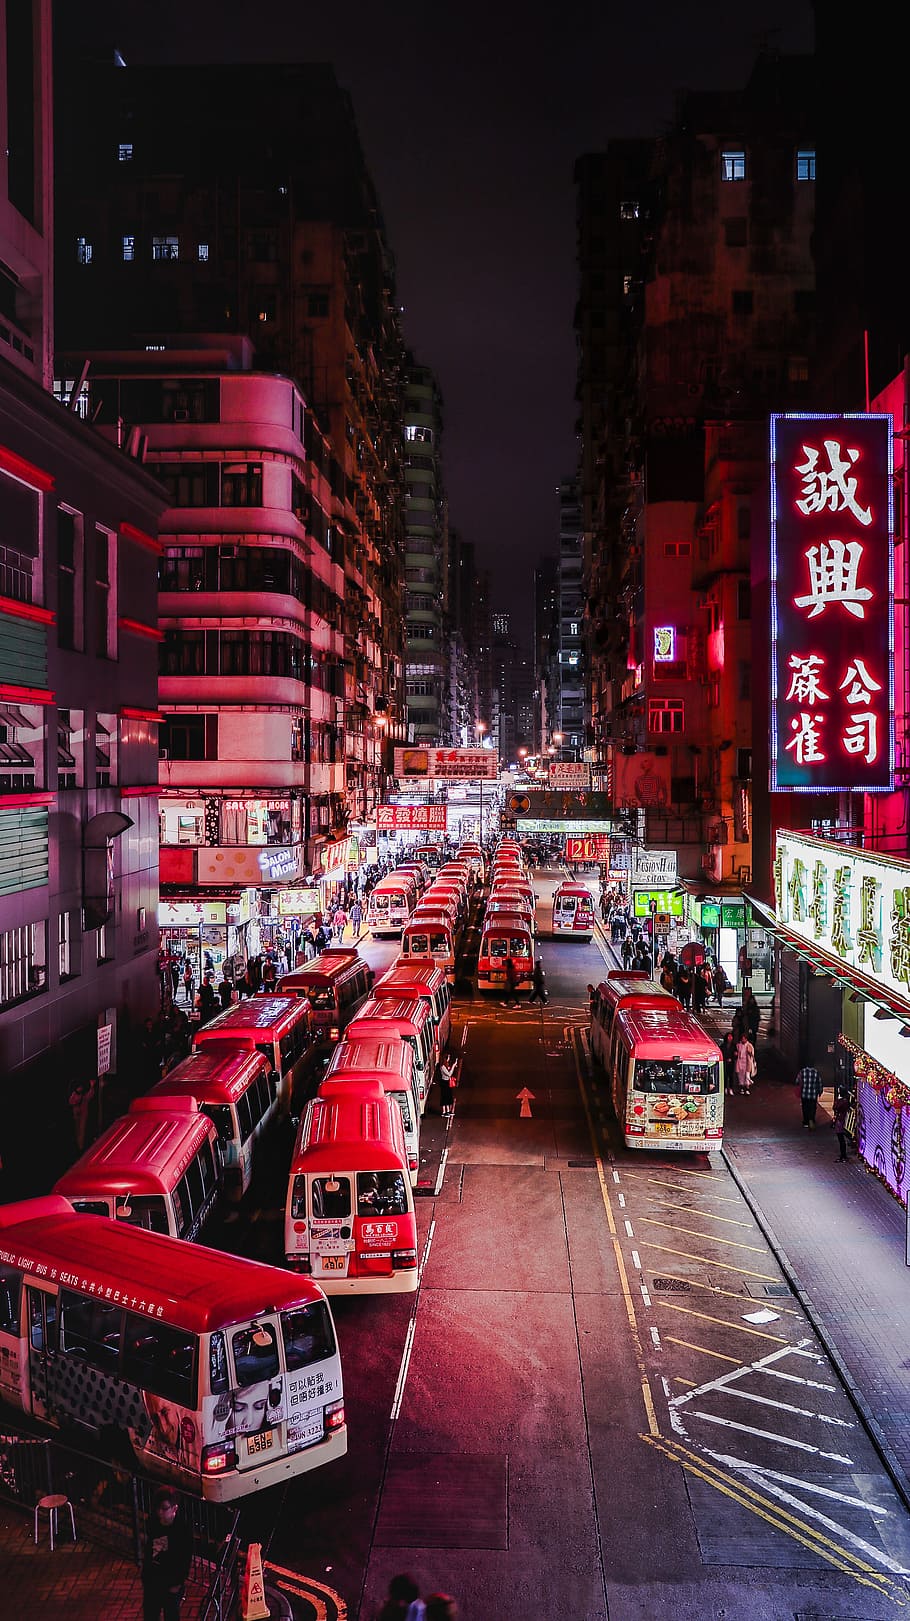 red and white bus, neon, traffic, busy, crowd, road, city, night